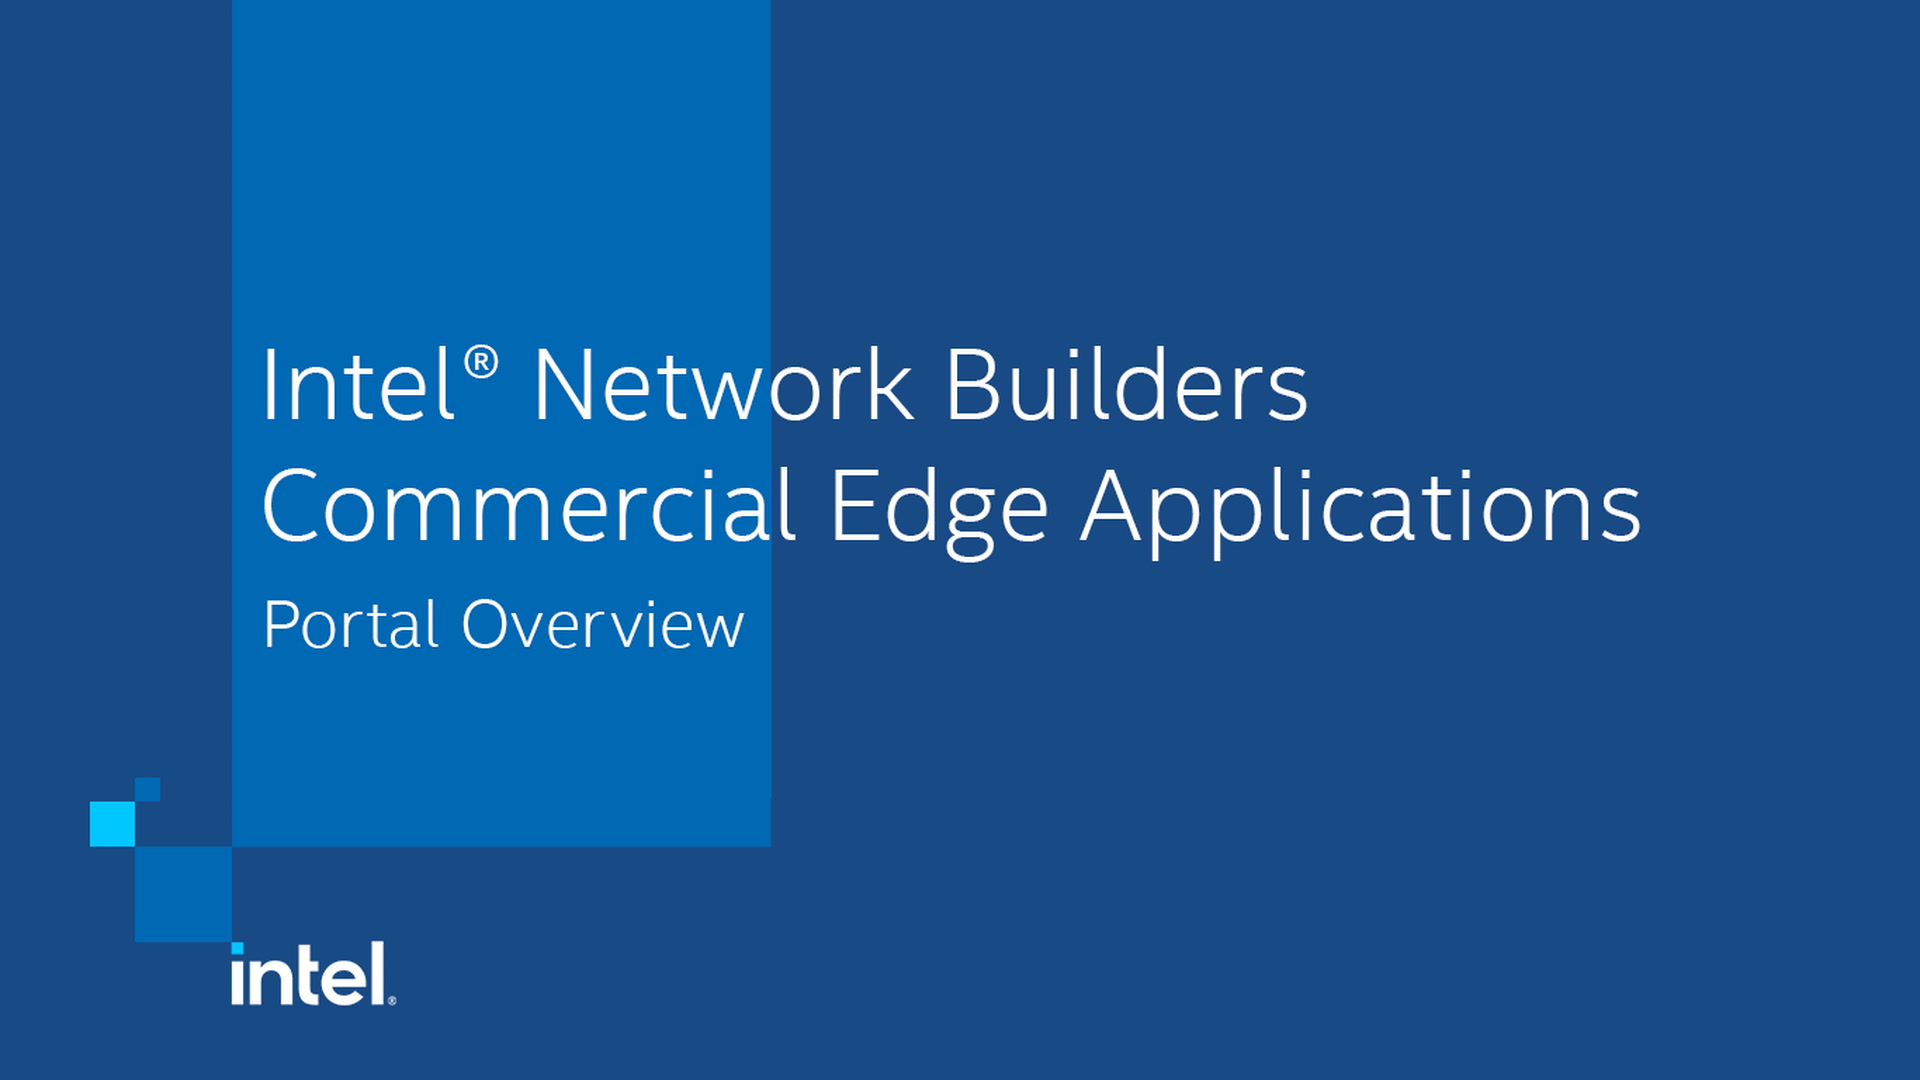 Chapter 1: Commercial Edge Application Portal Overview